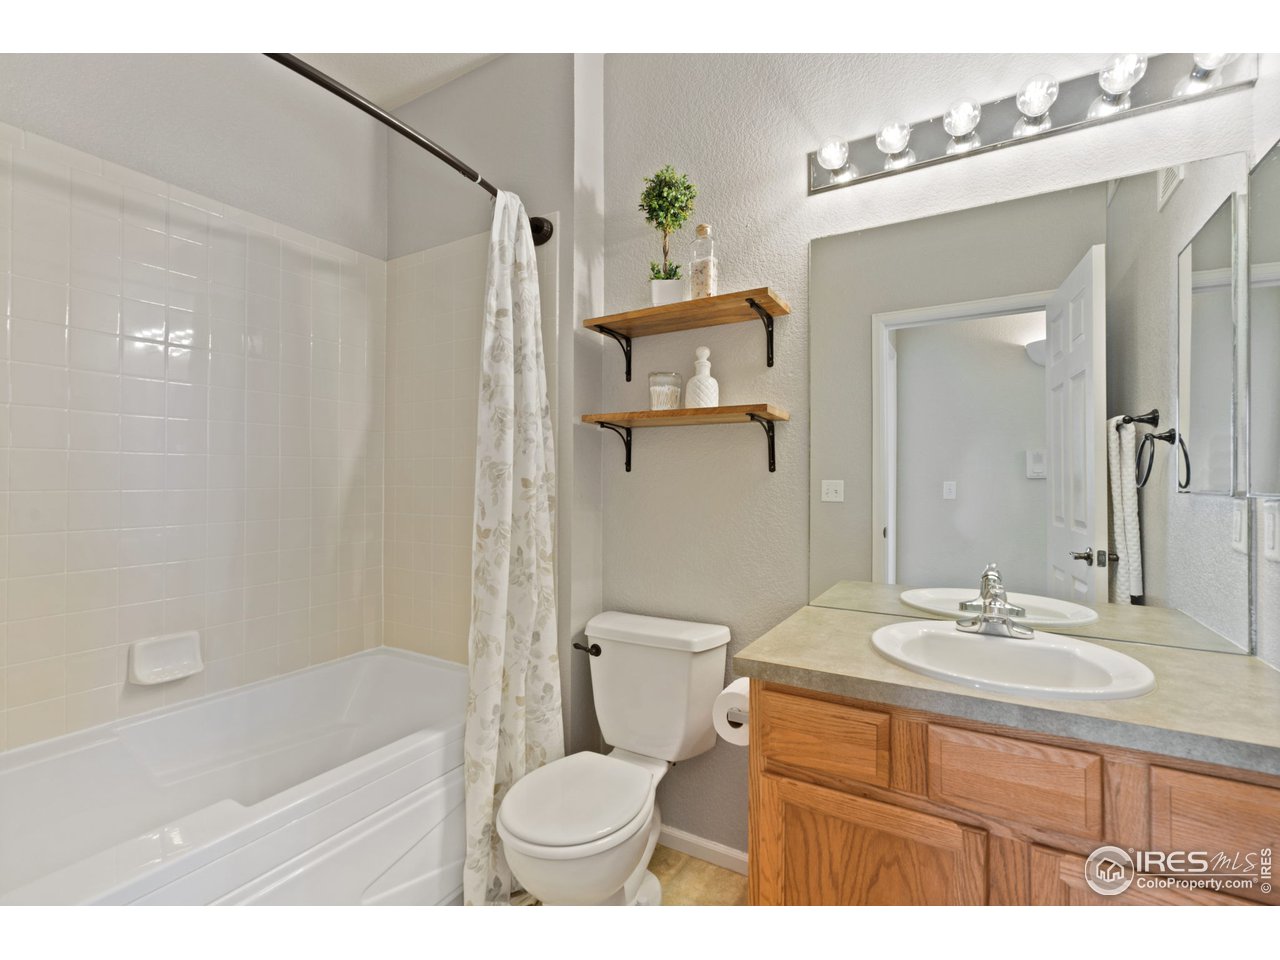 Deep soaking tub with tile surround